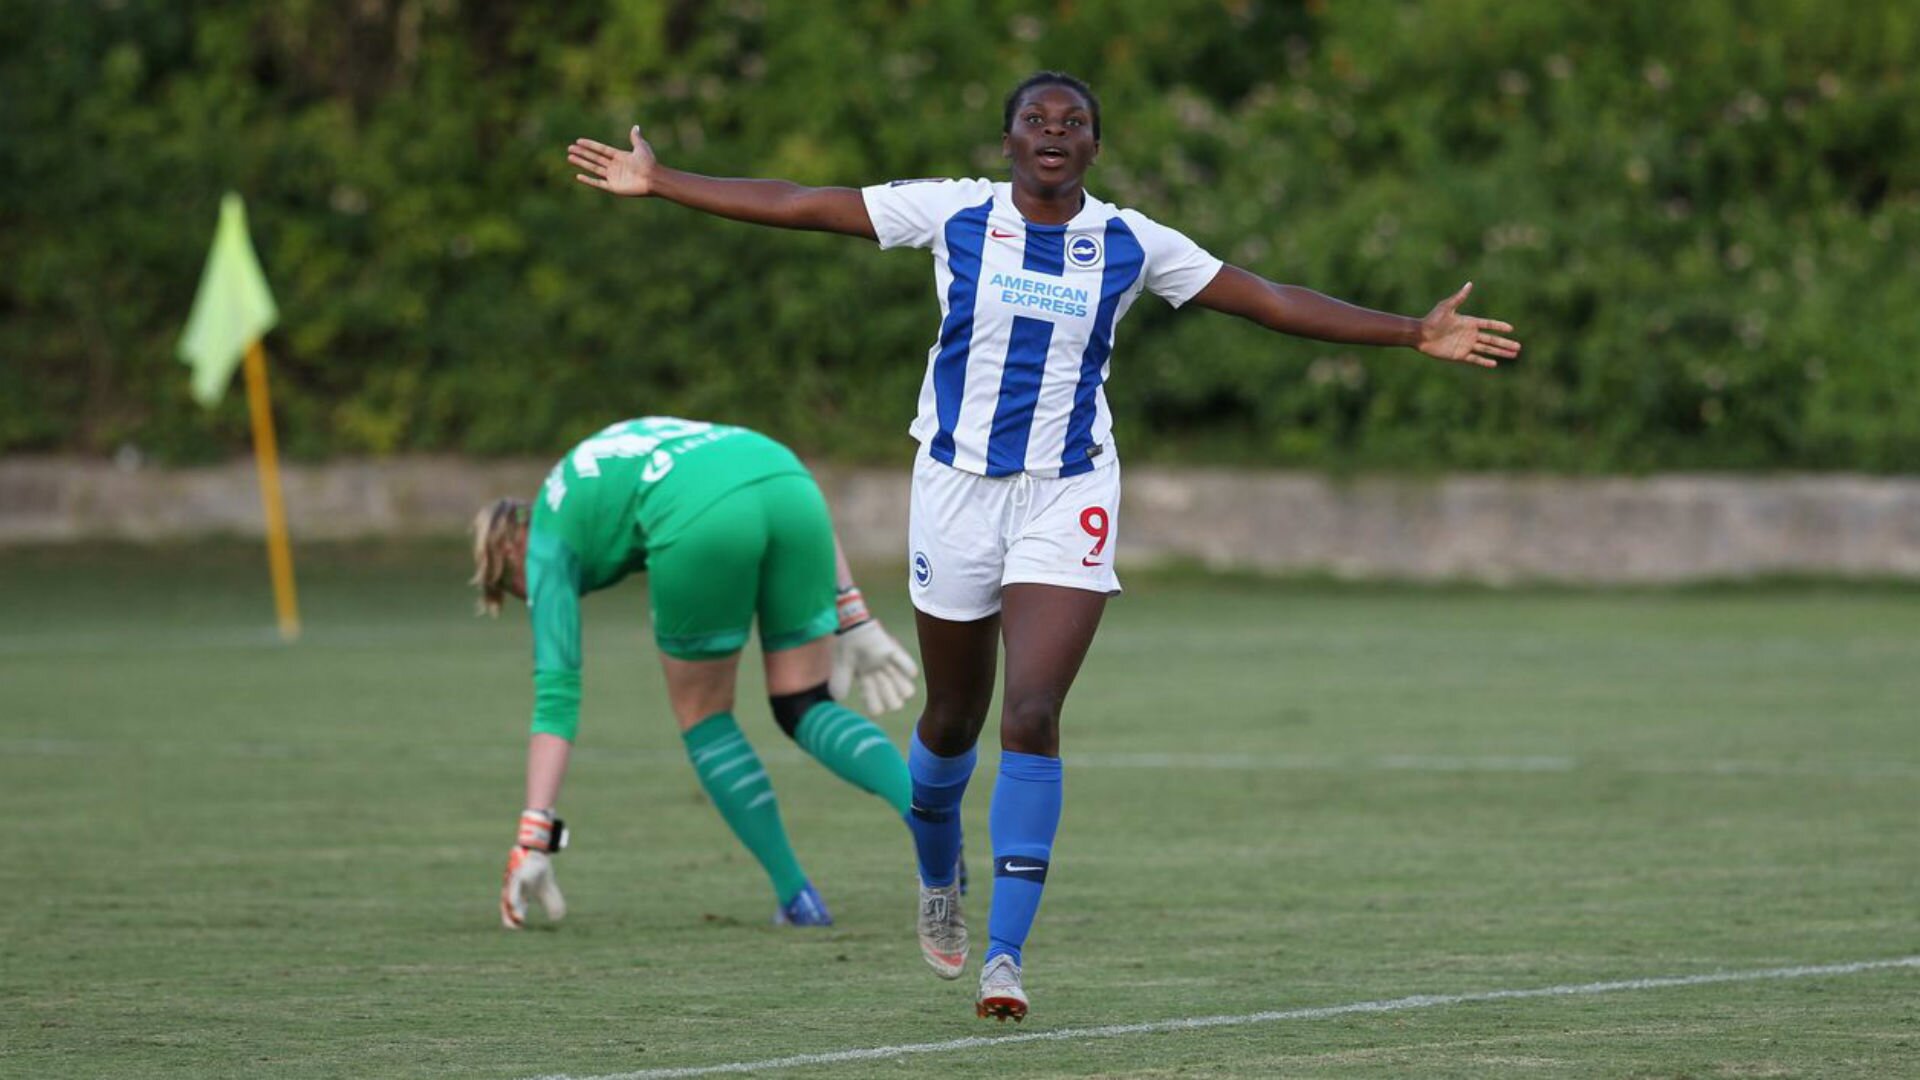 Ini Umotong Cherishes Third Goal With Brighton Belles, Targets Many More